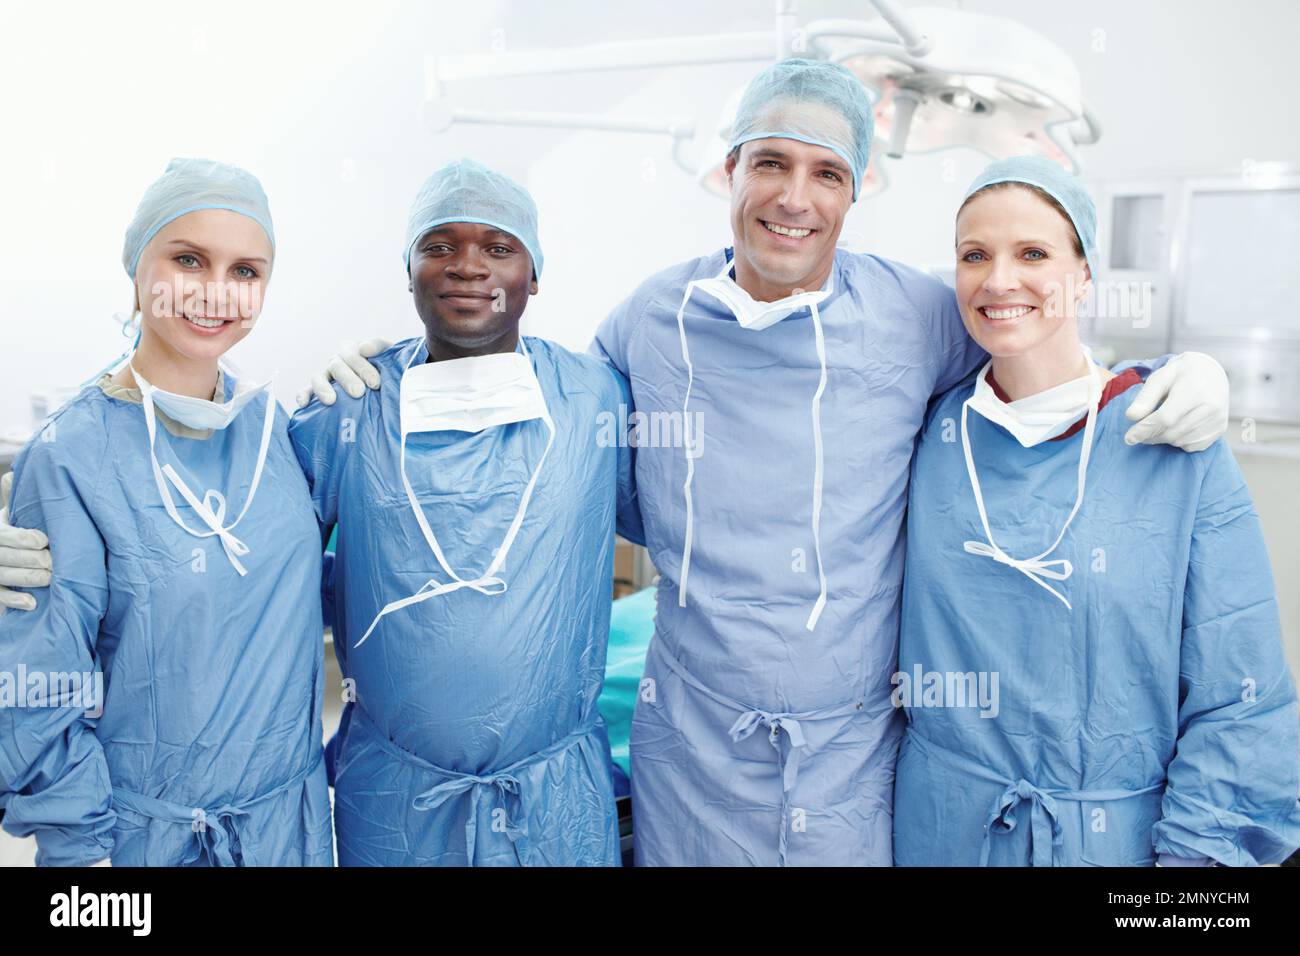 We are part of a family in this hospital. A happy team of medical surgeons and doctors embarcing one another in an operating theatre - Teamwork. Stock Photo